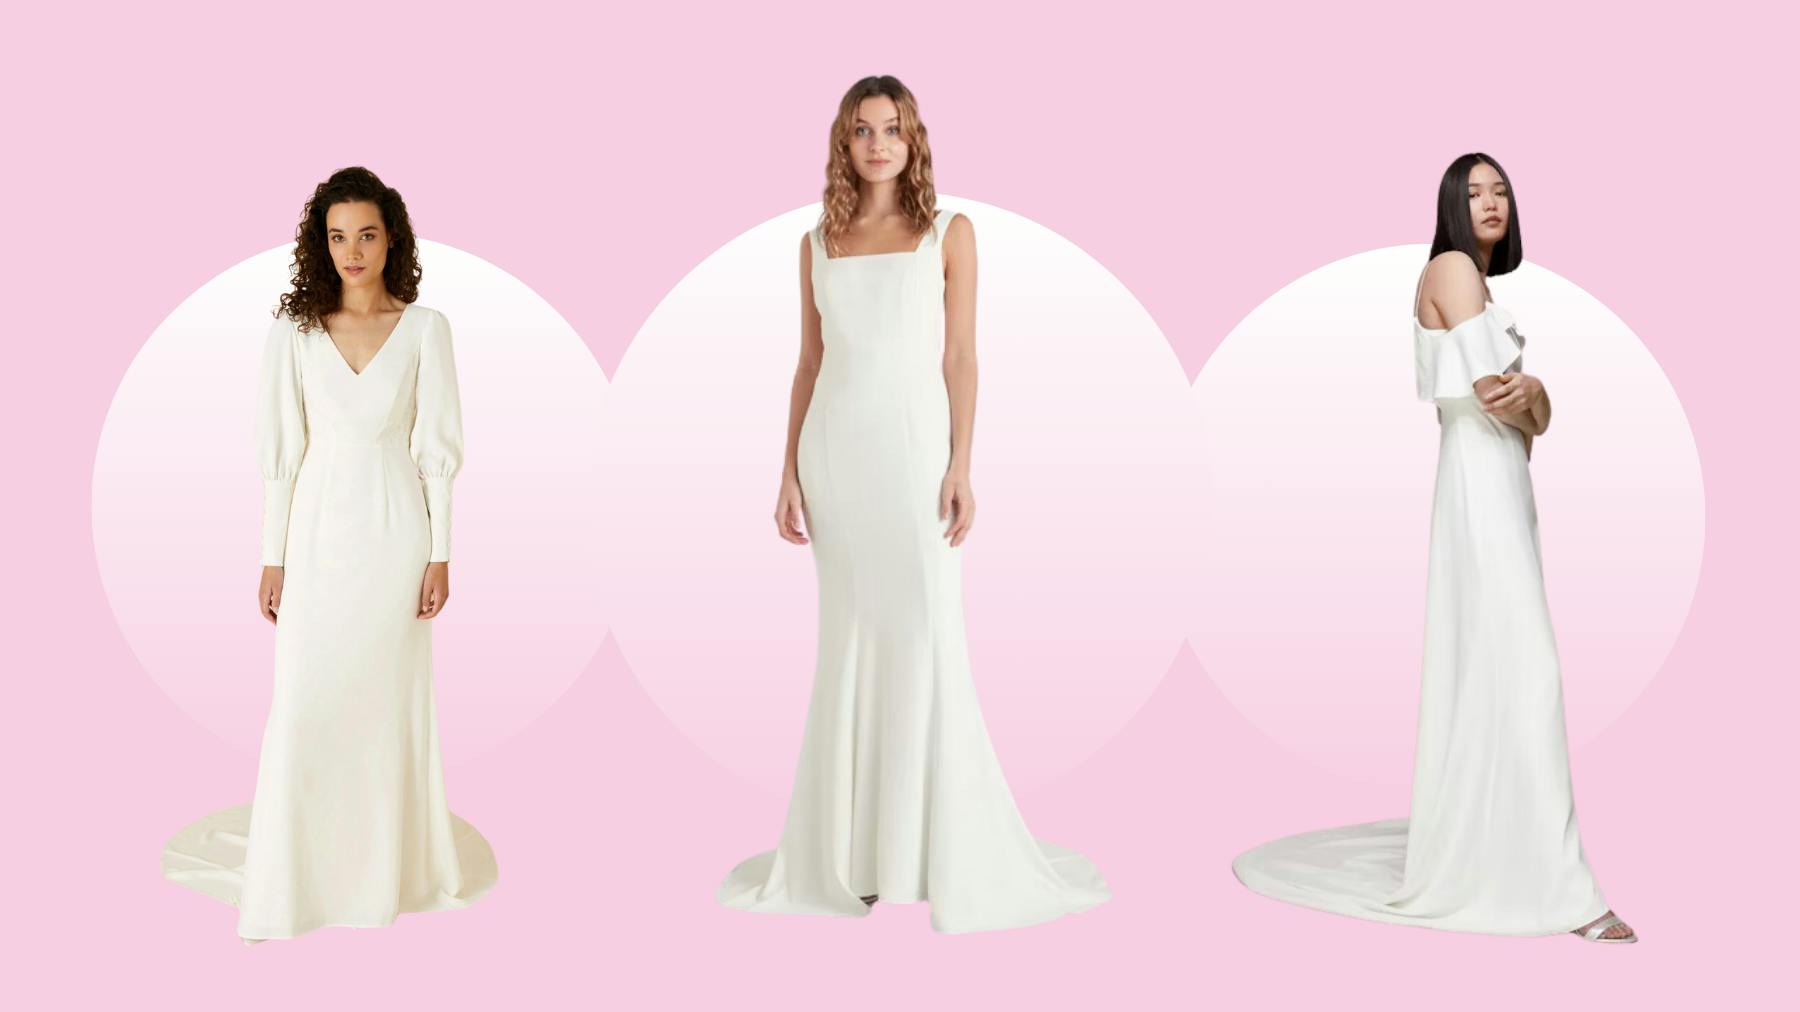 Spring fashion dresses that are affordable and perfect for wedding season